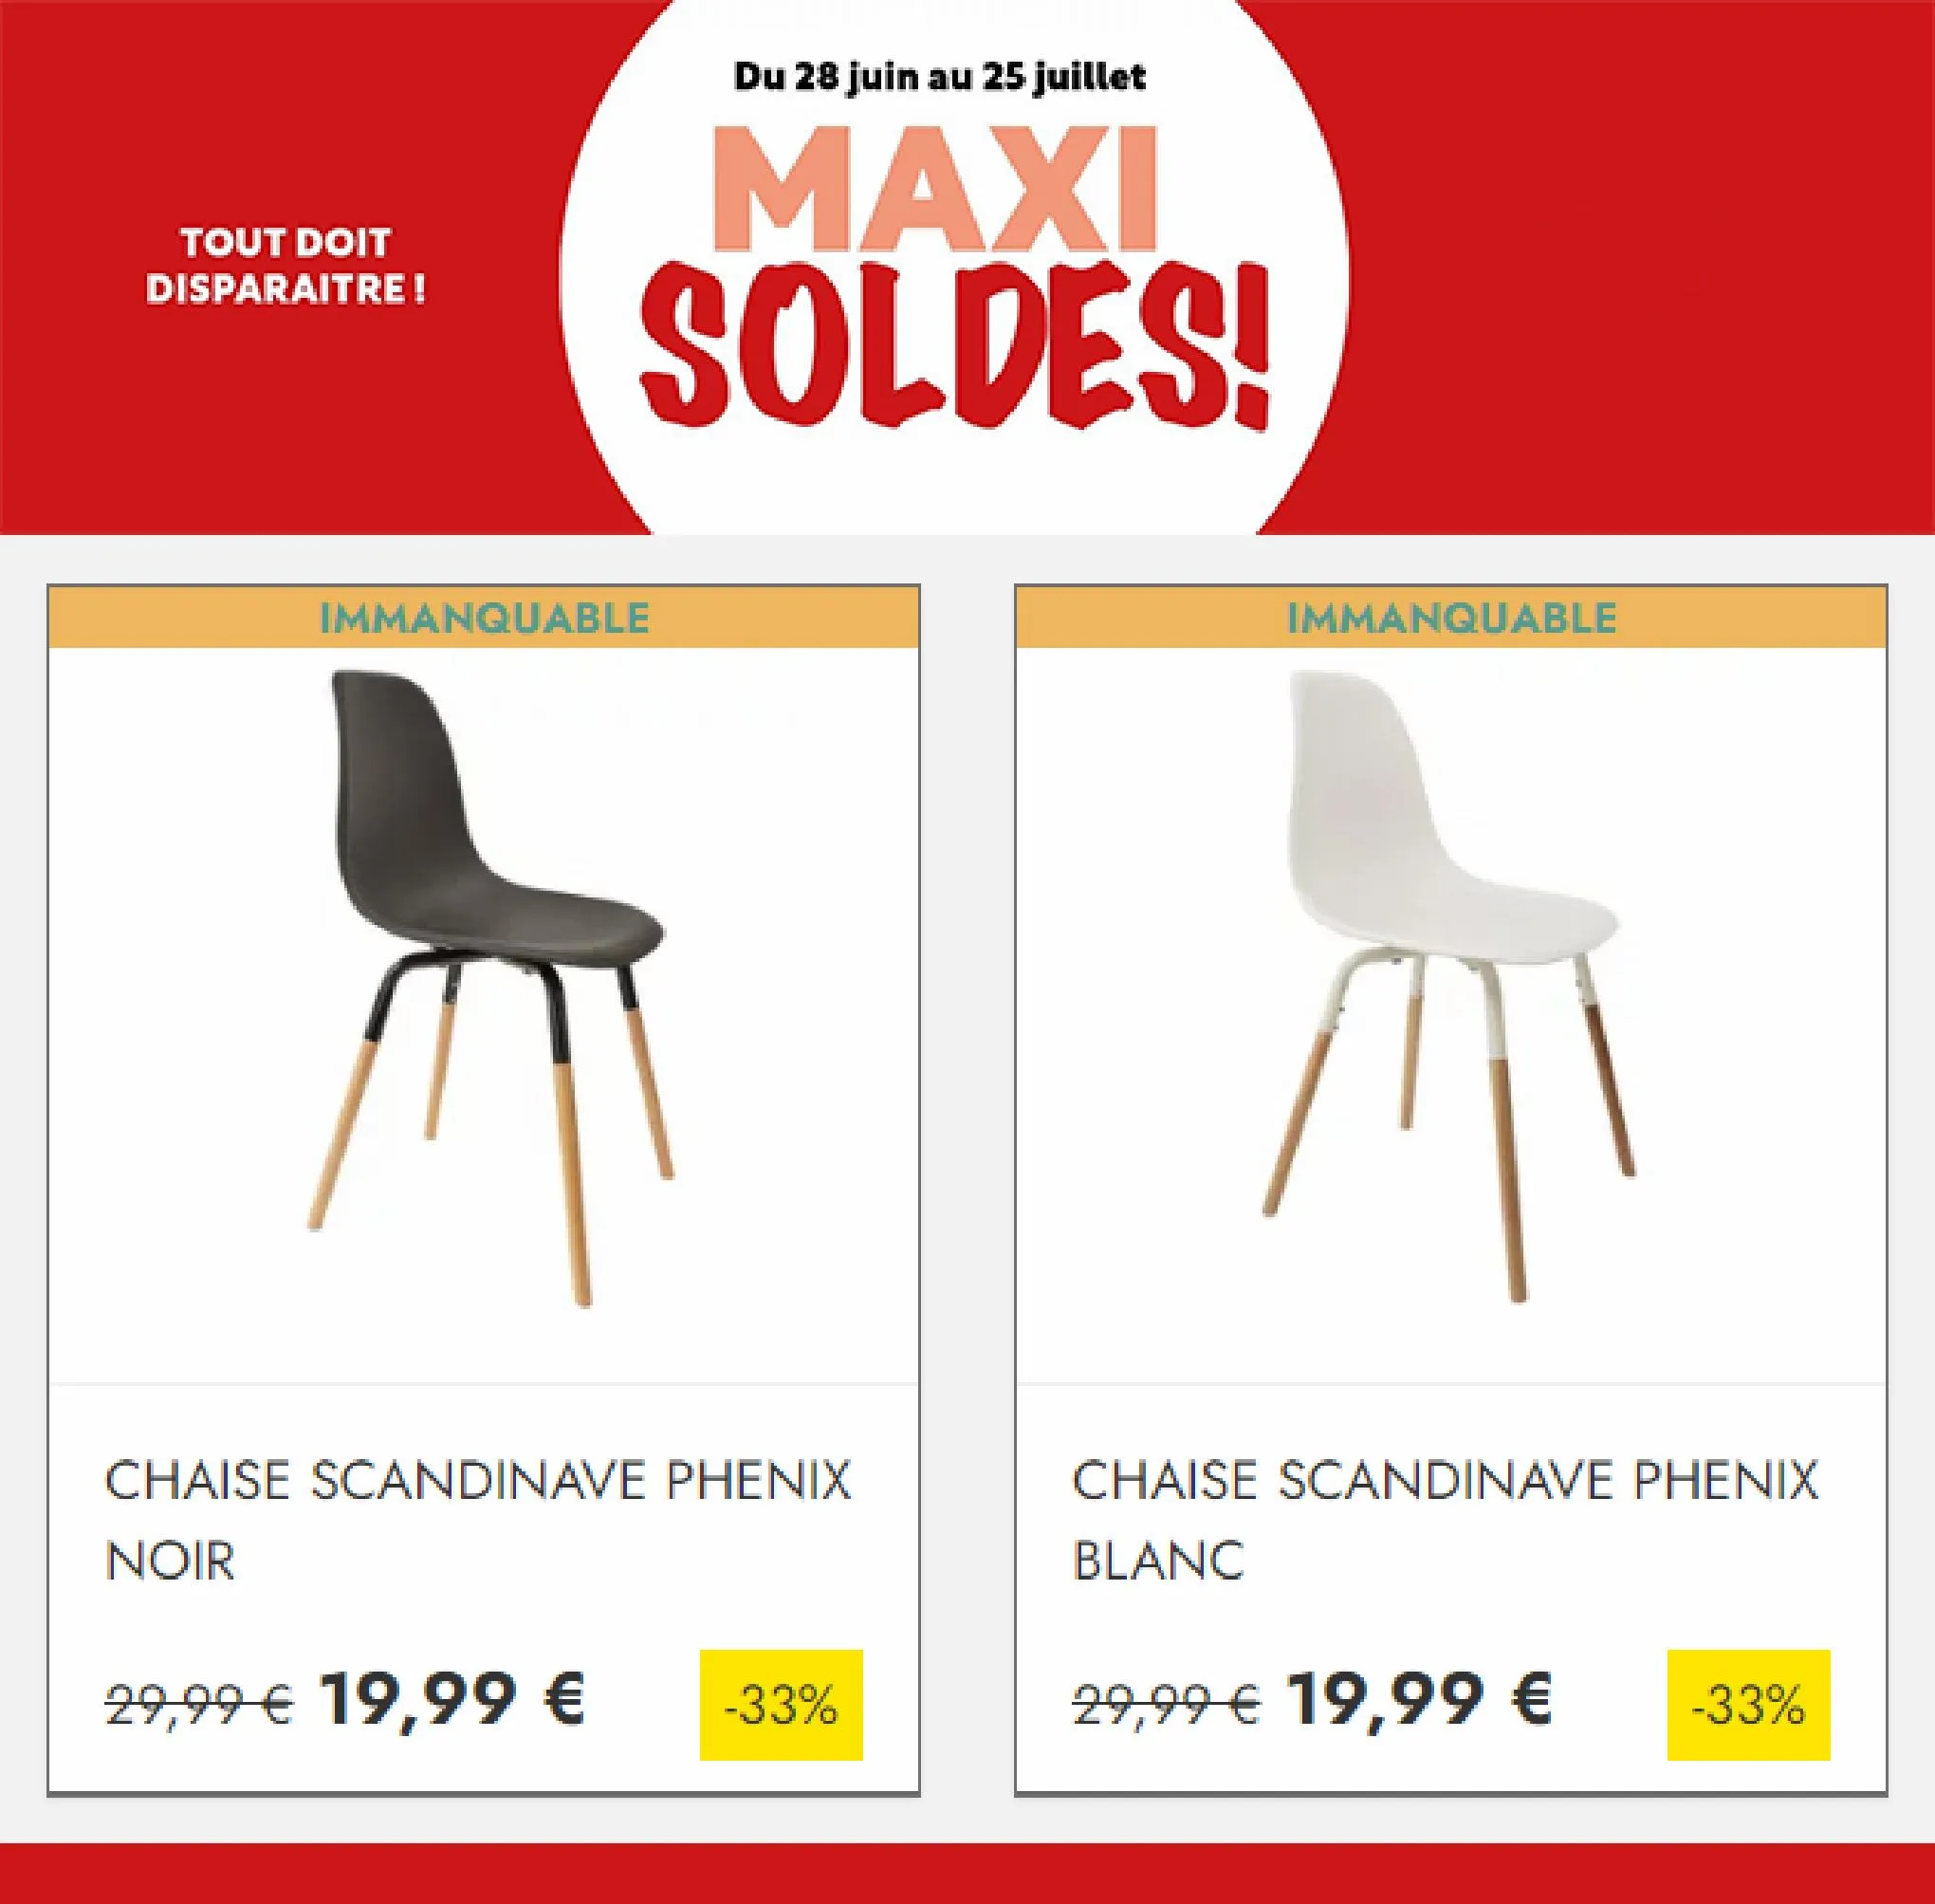 Catalogue Maxi Soldes!, page 00003